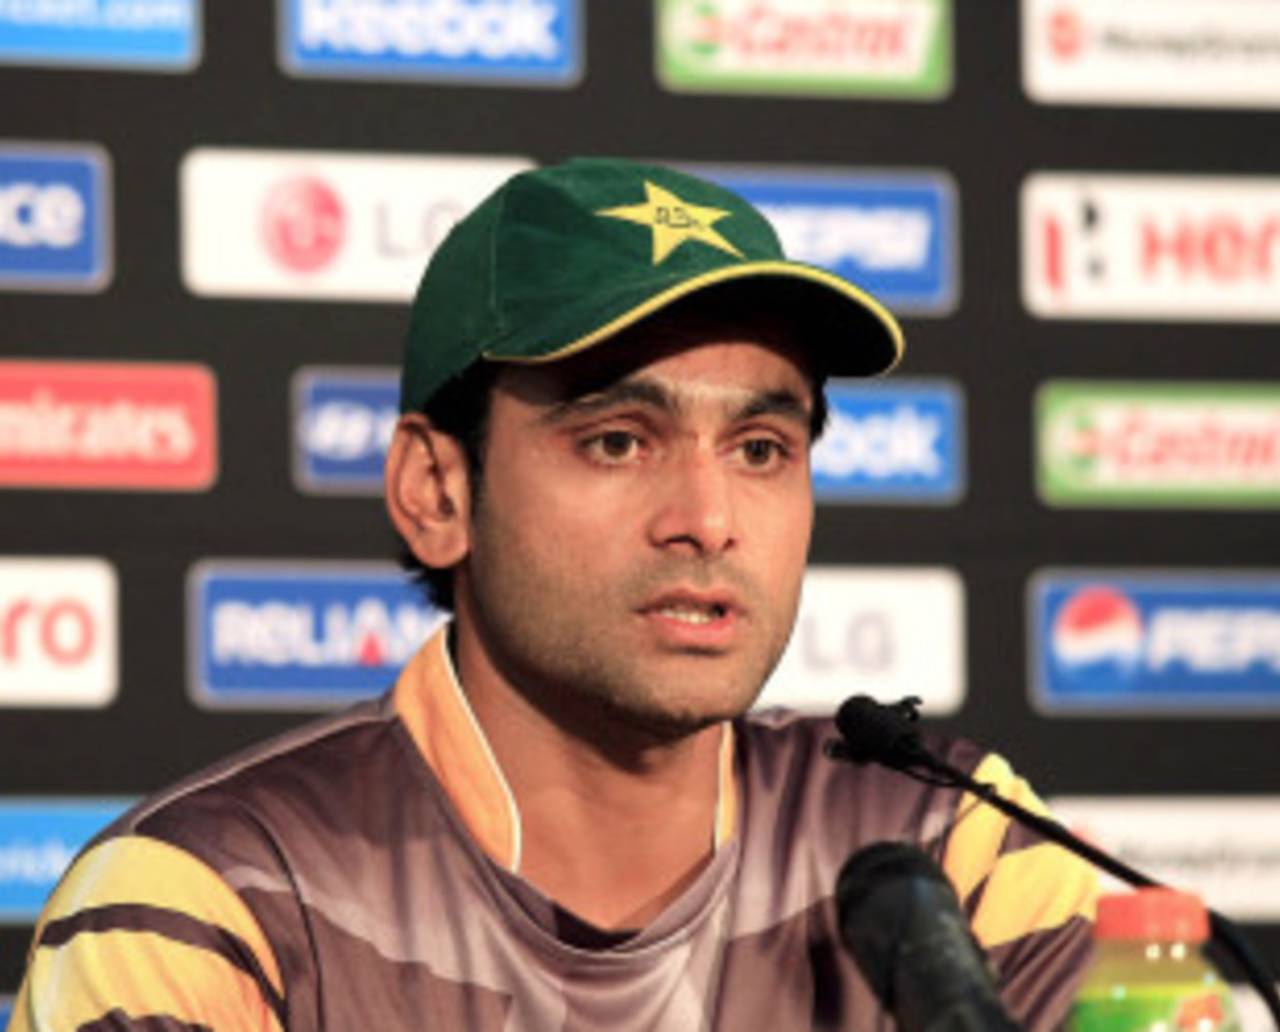 Mohammad Hafeez: "I have assessed the performances of some of the players [during the tournament], and will discuss them with the selection committee"&nbsp;&nbsp;&bull;&nbsp;&nbsp;ICC